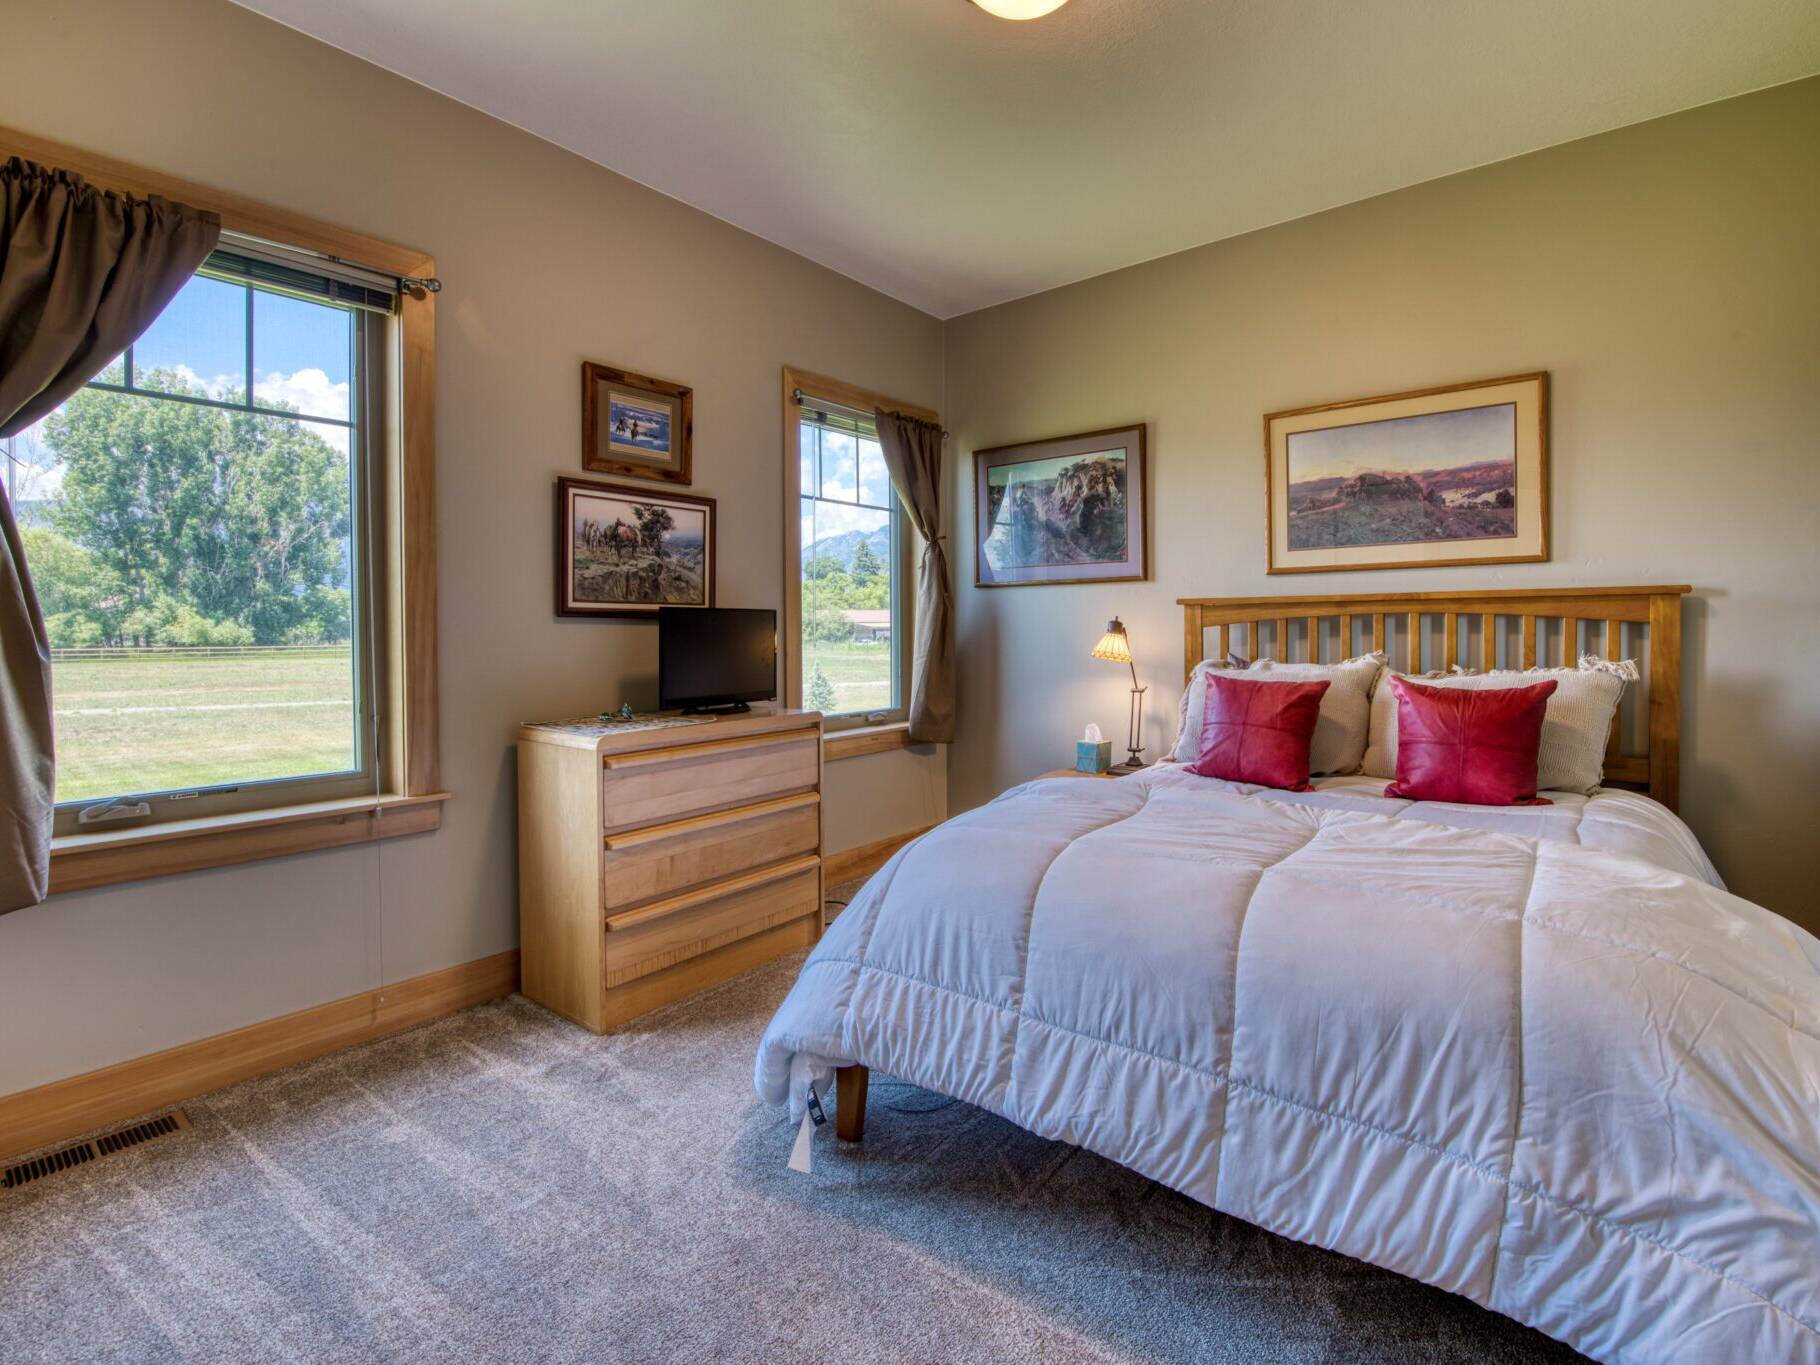 Guest bedroom with carpet flooring and wood trim in a custom home in Hamilton, MT.